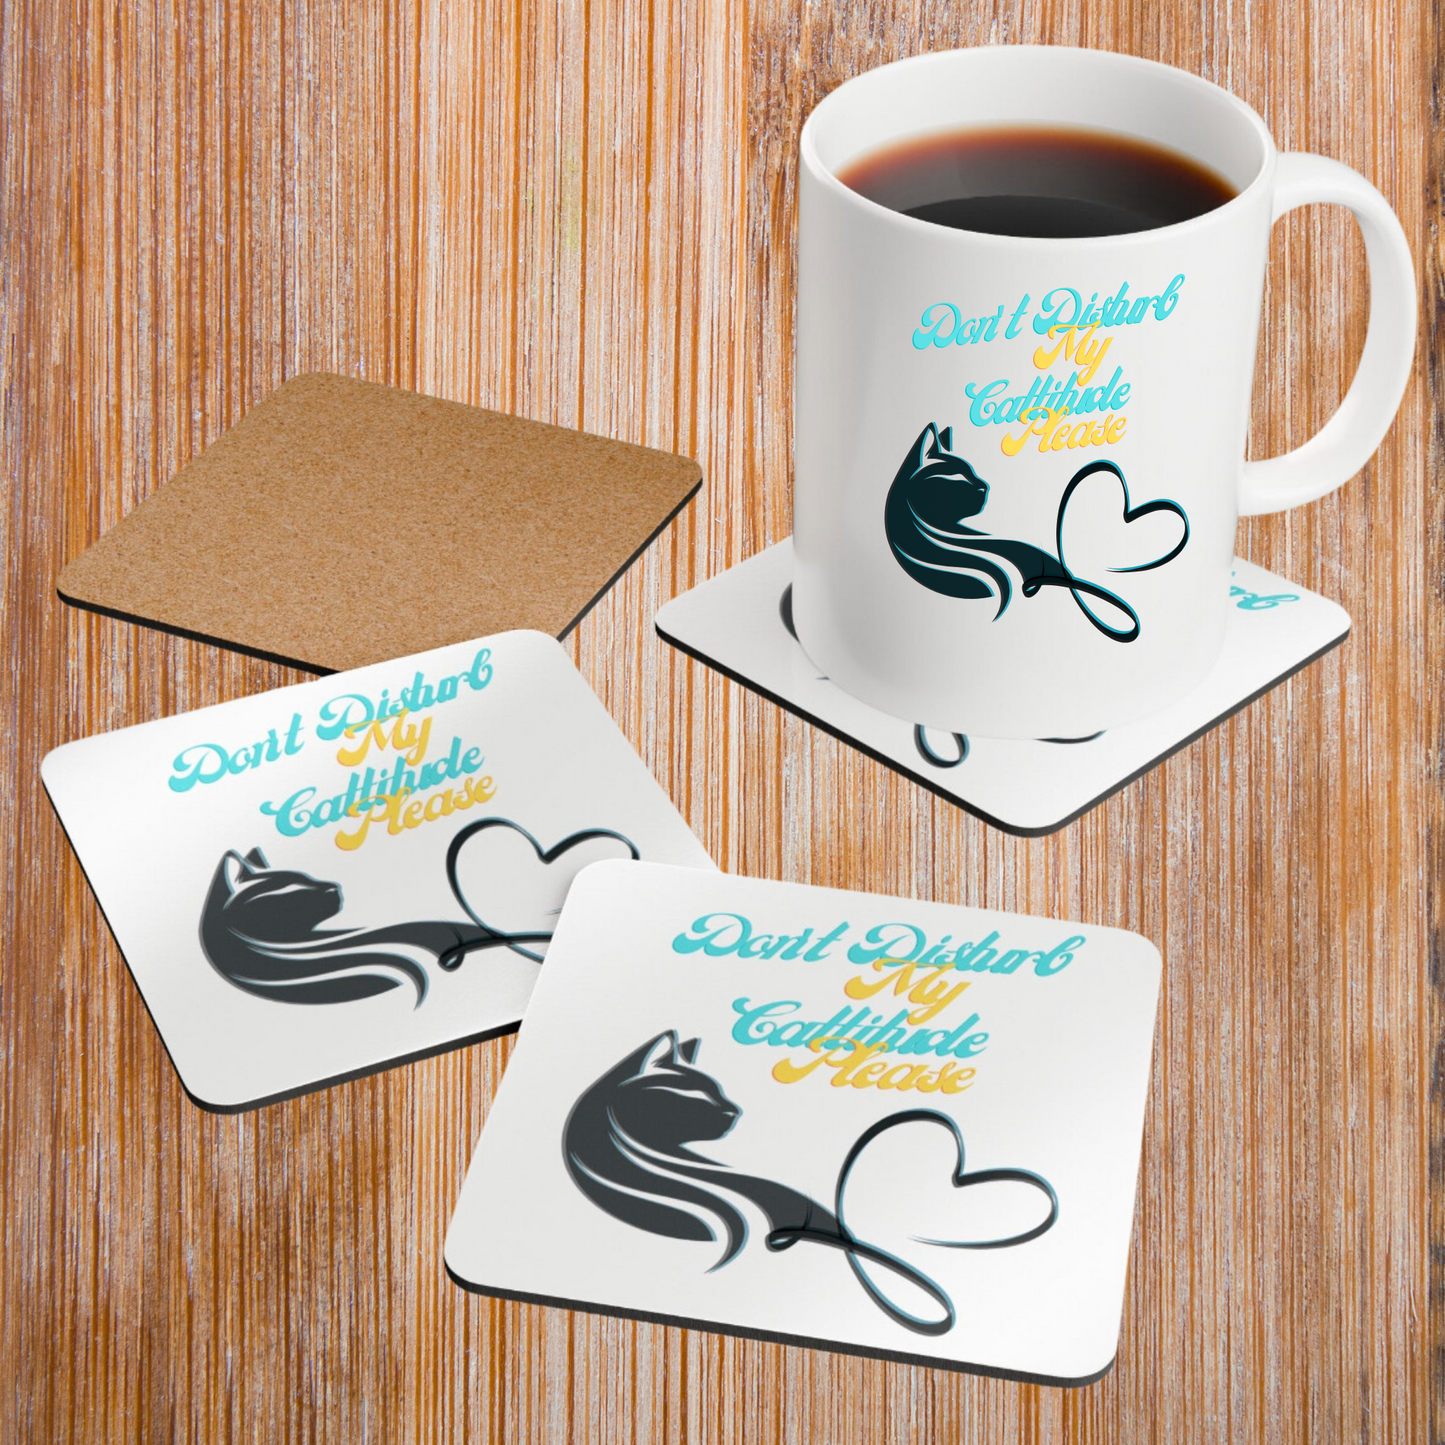 Cat-Lady Coasters, Unique "Don't Disturb My Cattitude" Sublimation Design, Cat Lover Mom Gift,  Kitchen and Home Decor, Matches Coffee Mug and Candle